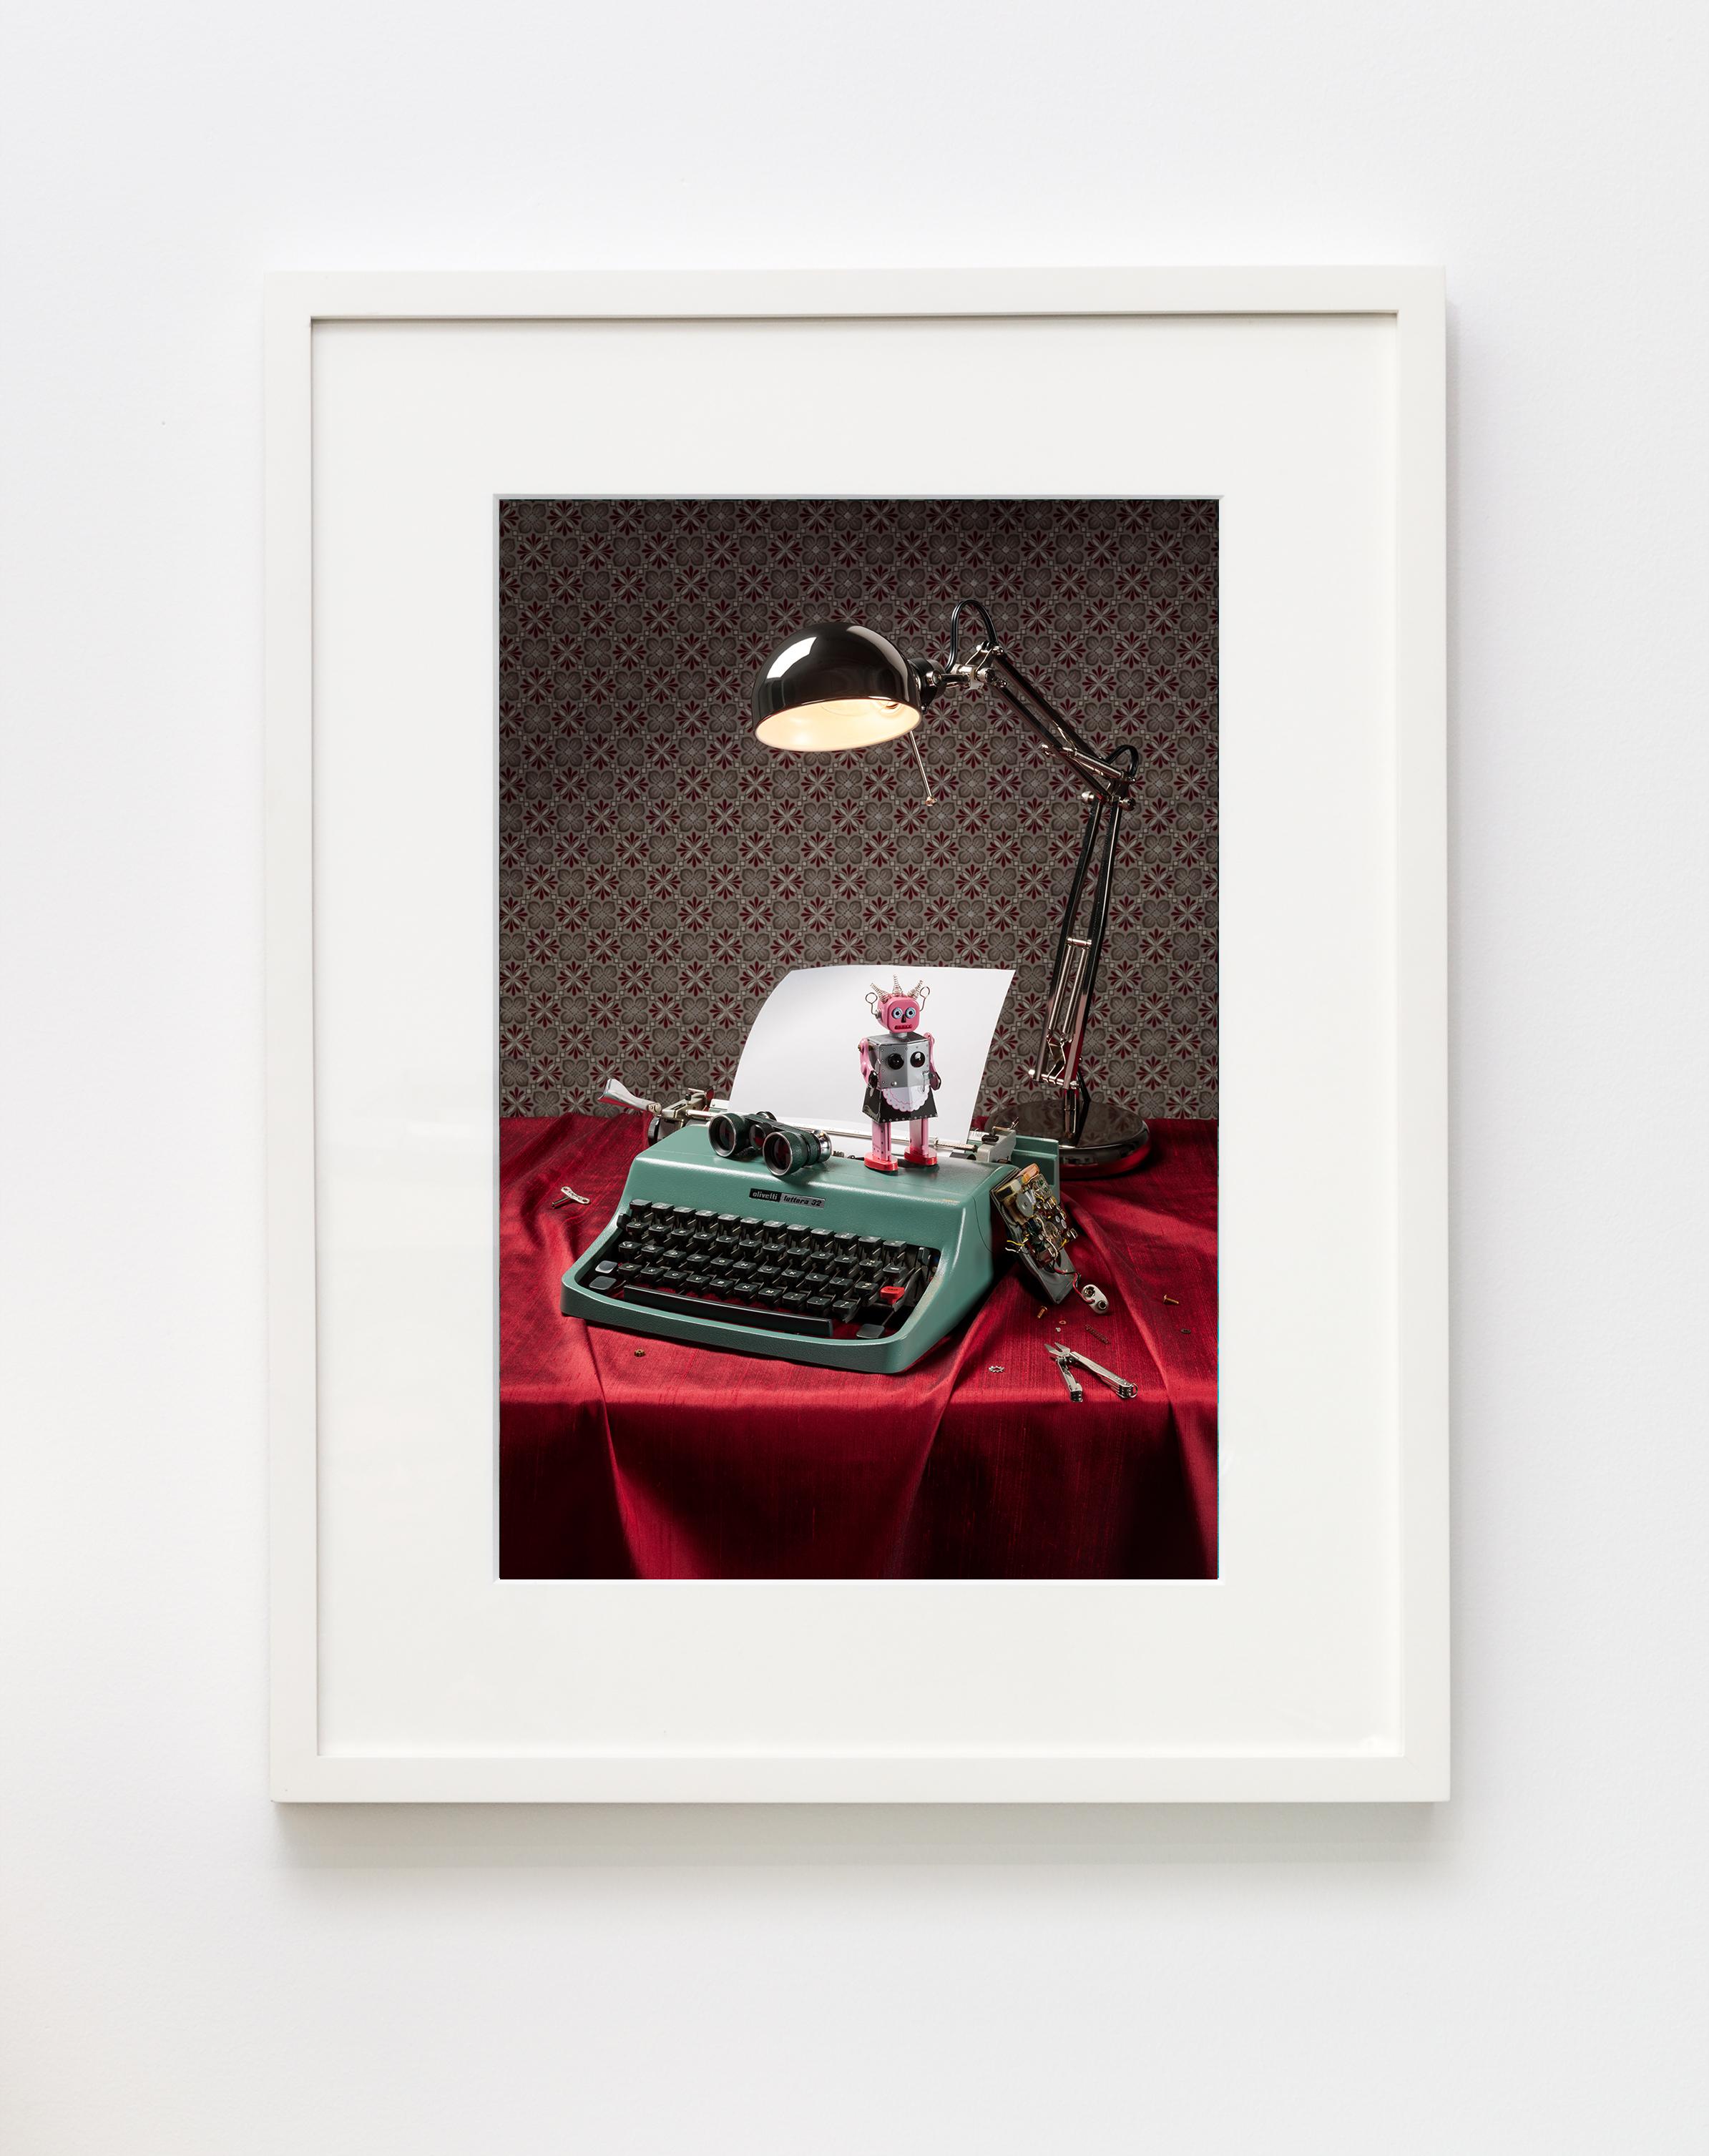 “Still Life with Robot” Contemporary Still-life Photo with Vintage Typewriter - Print by Jeanette May